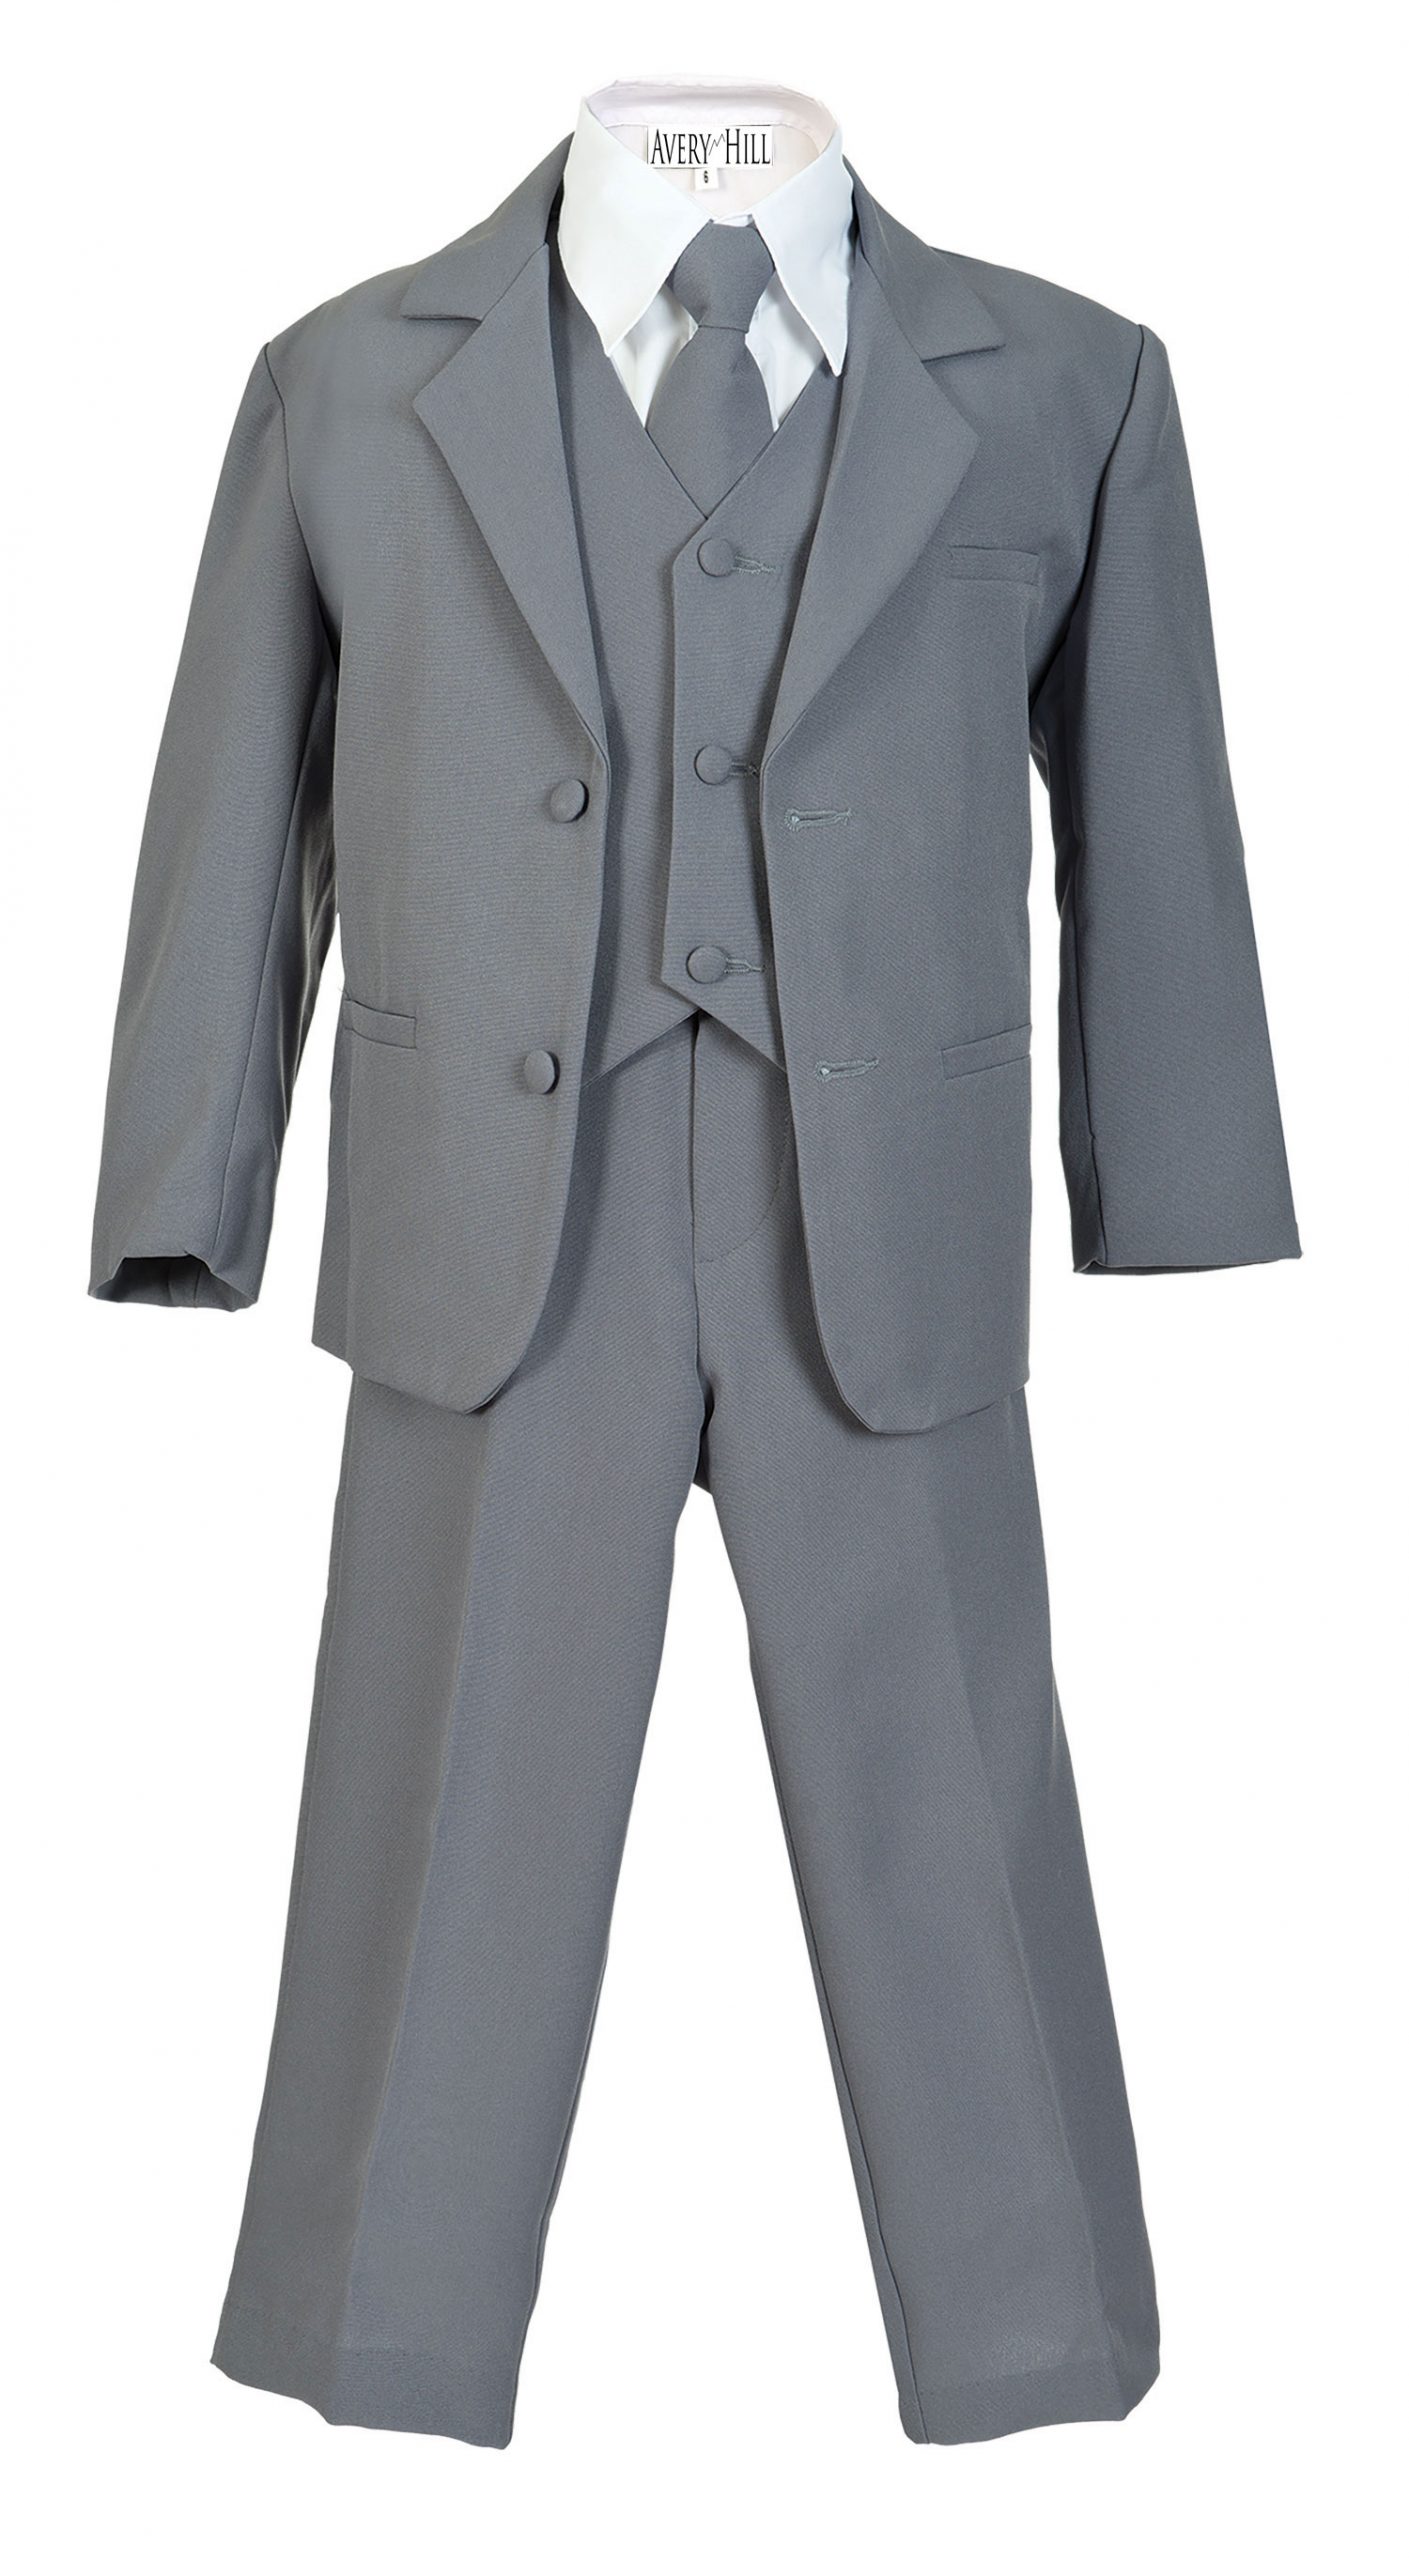 Avery Hill Boys Formal 5 Piece Suit with Shirt and Vest Slate Gray - 4T